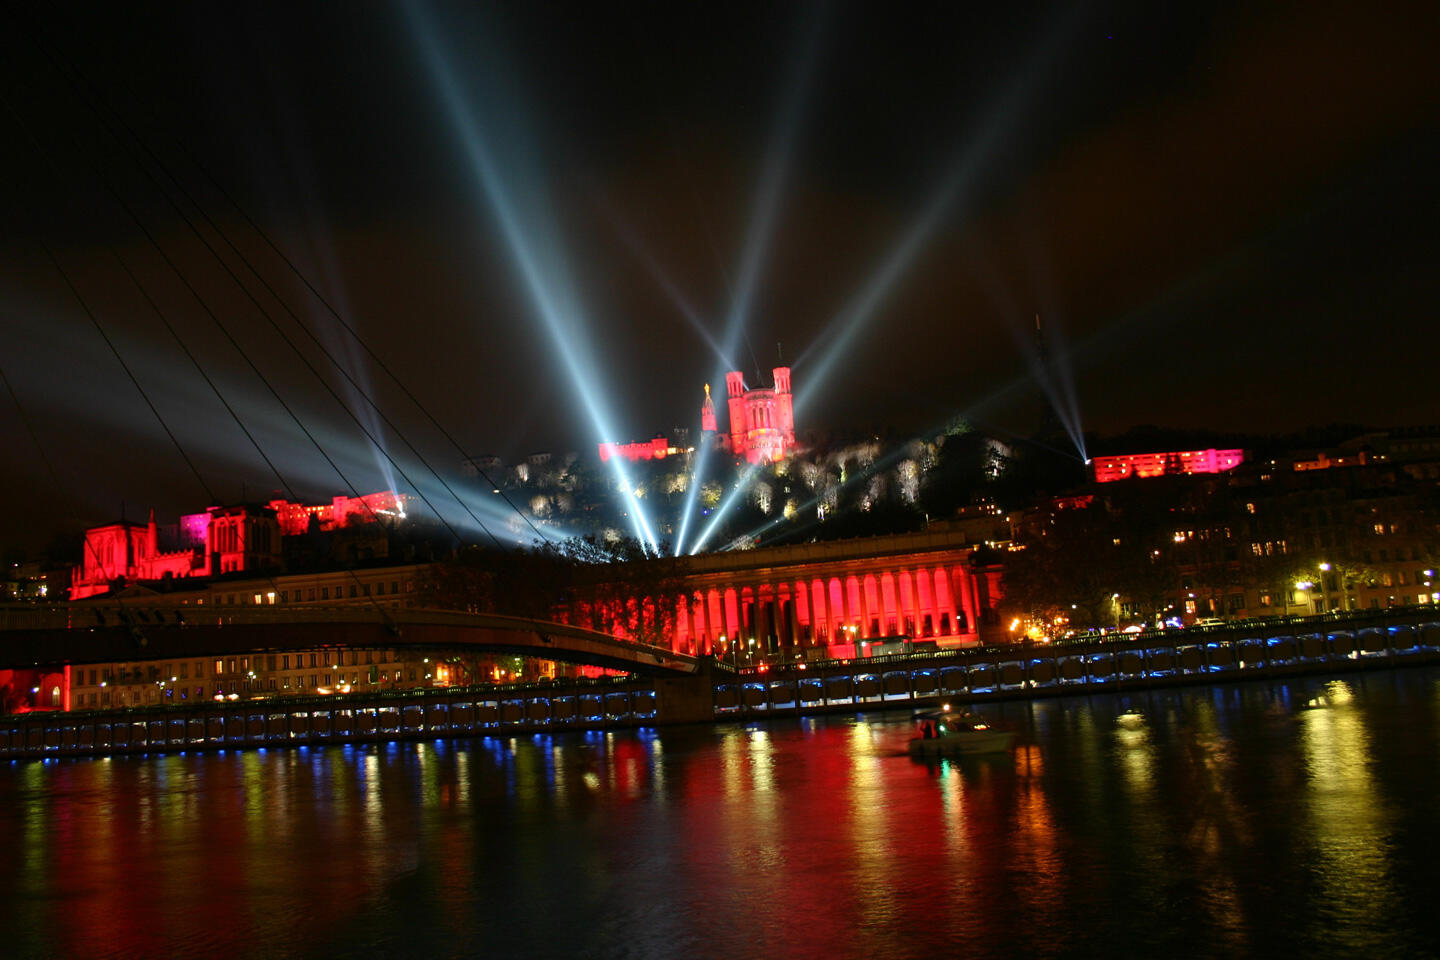 Night view of Lyon, with red illuminations of the Basilique de Fourvière and the historic Palais de Justice, beams of light crossing the sky above the bridge, and reflections of the lights on the Saône during the Fête des Lumières.